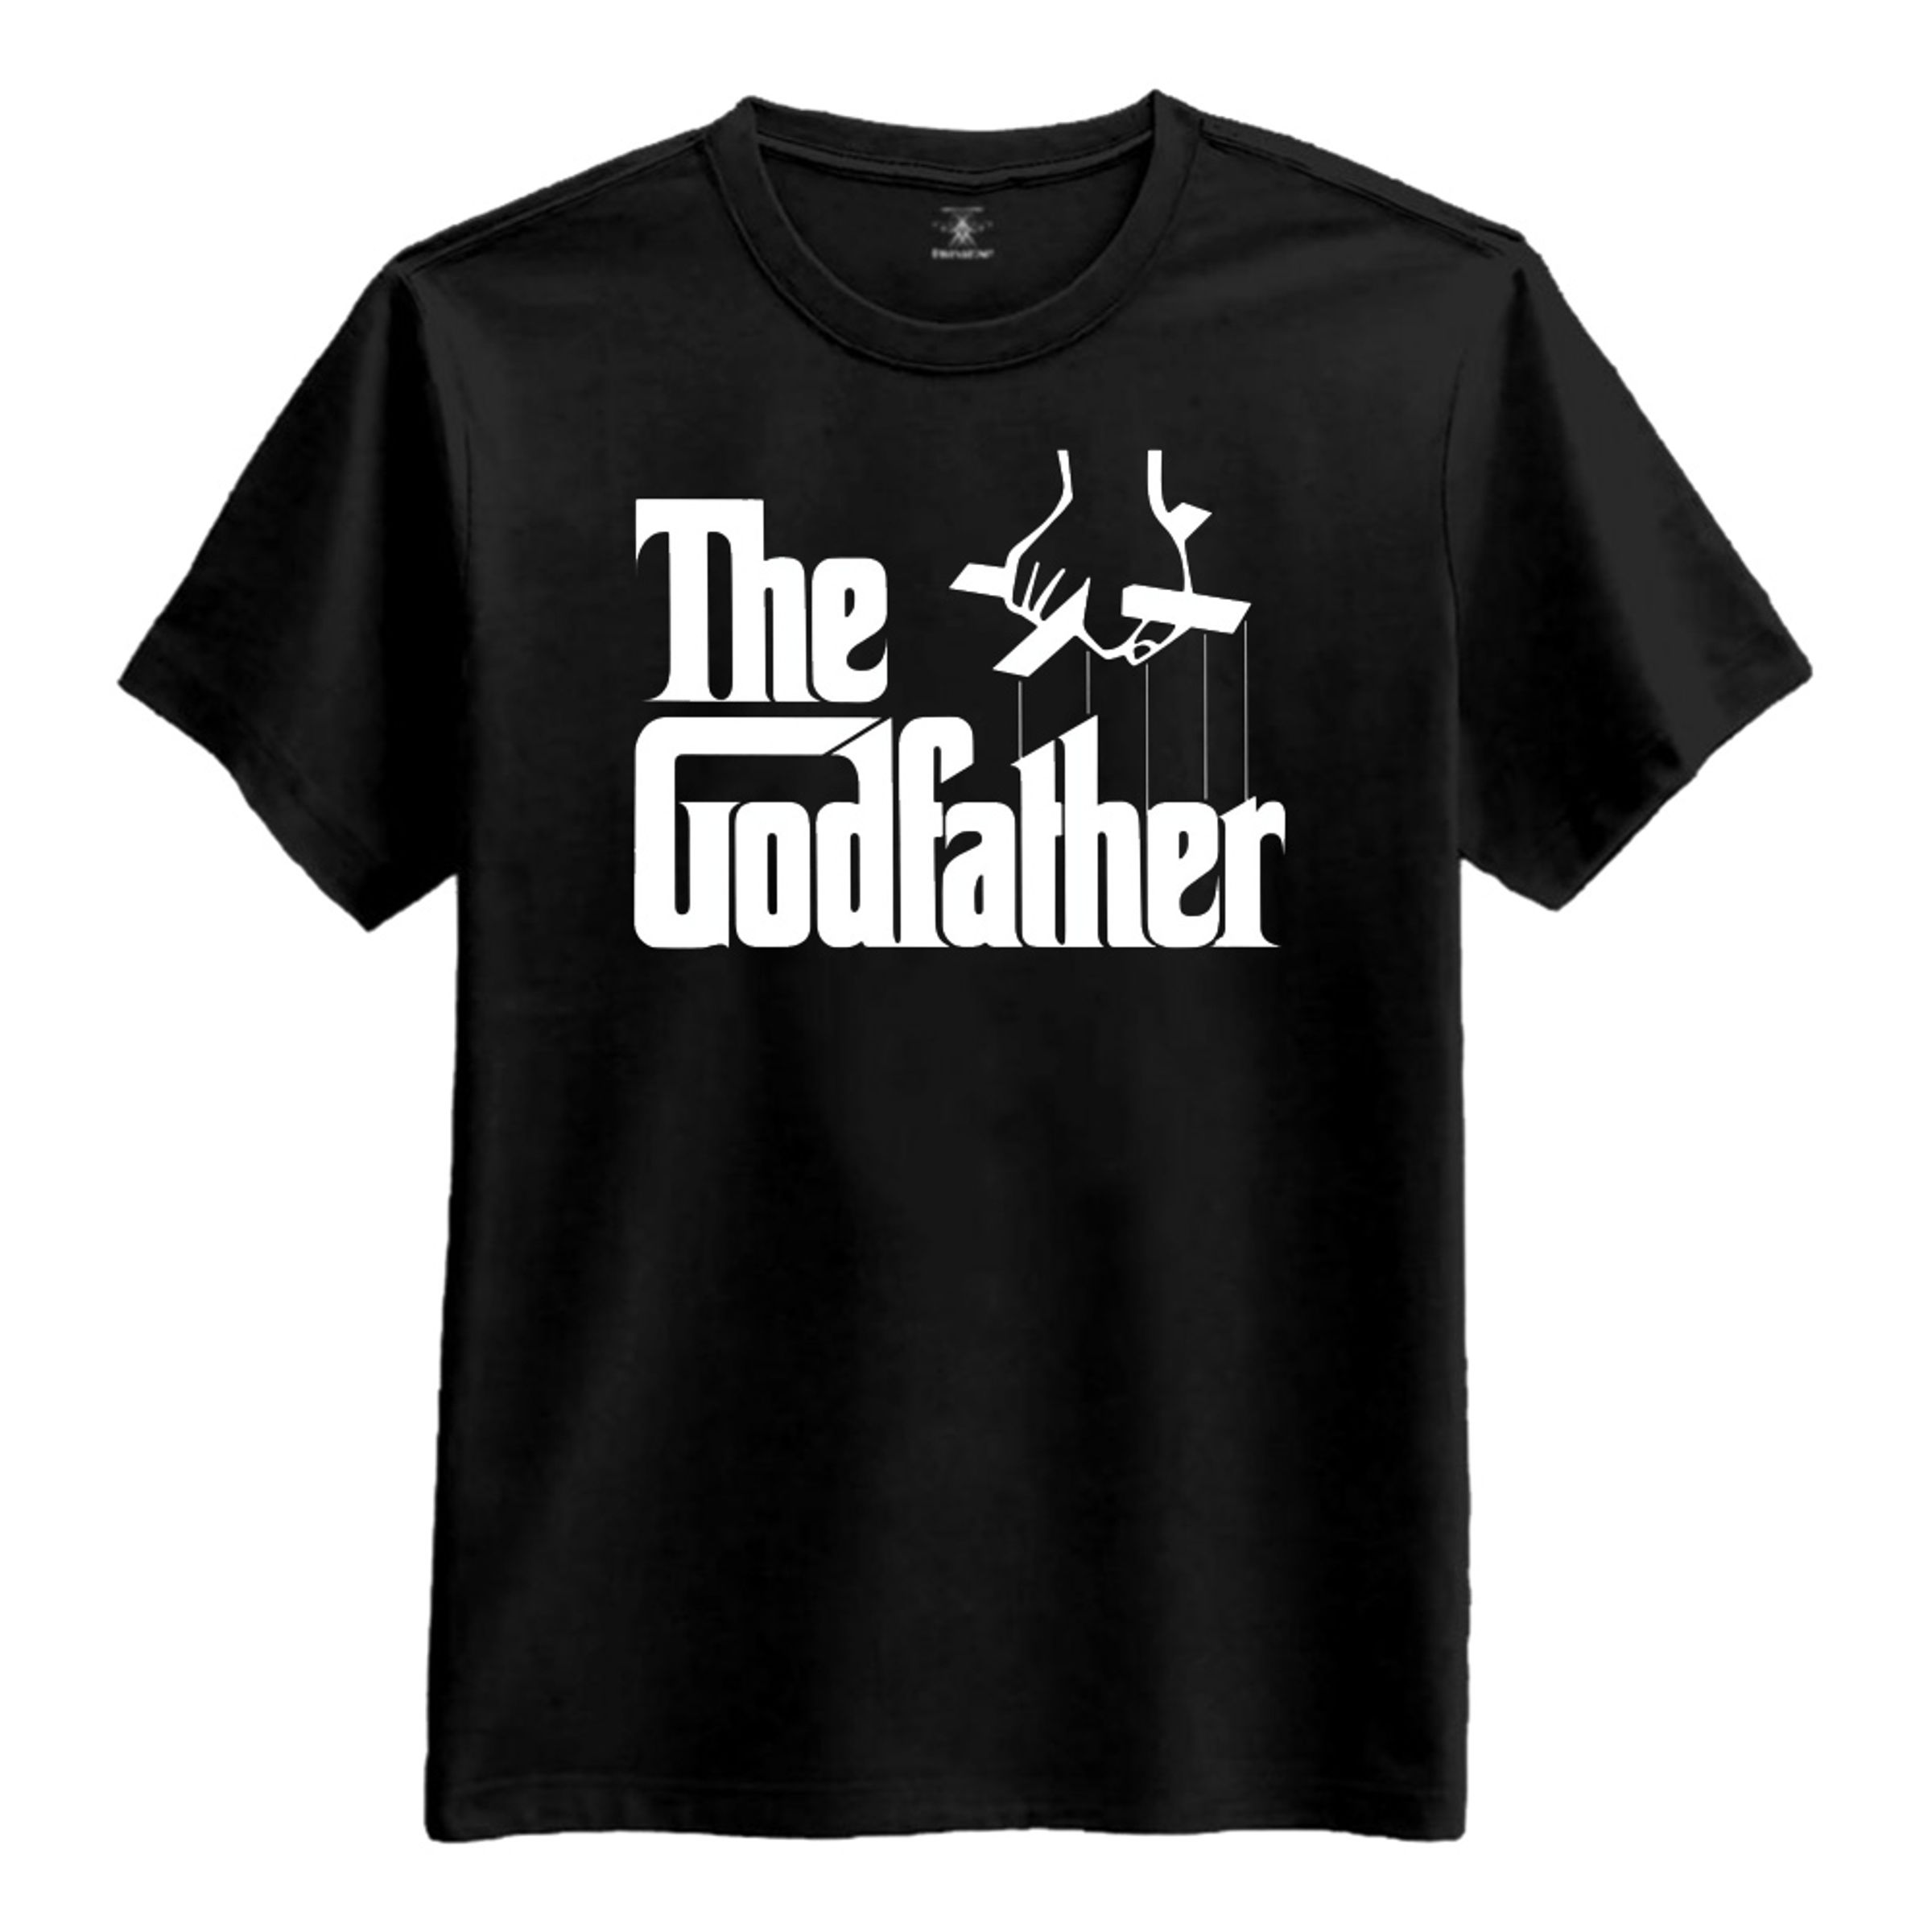 The Godfather T-shirt - Small